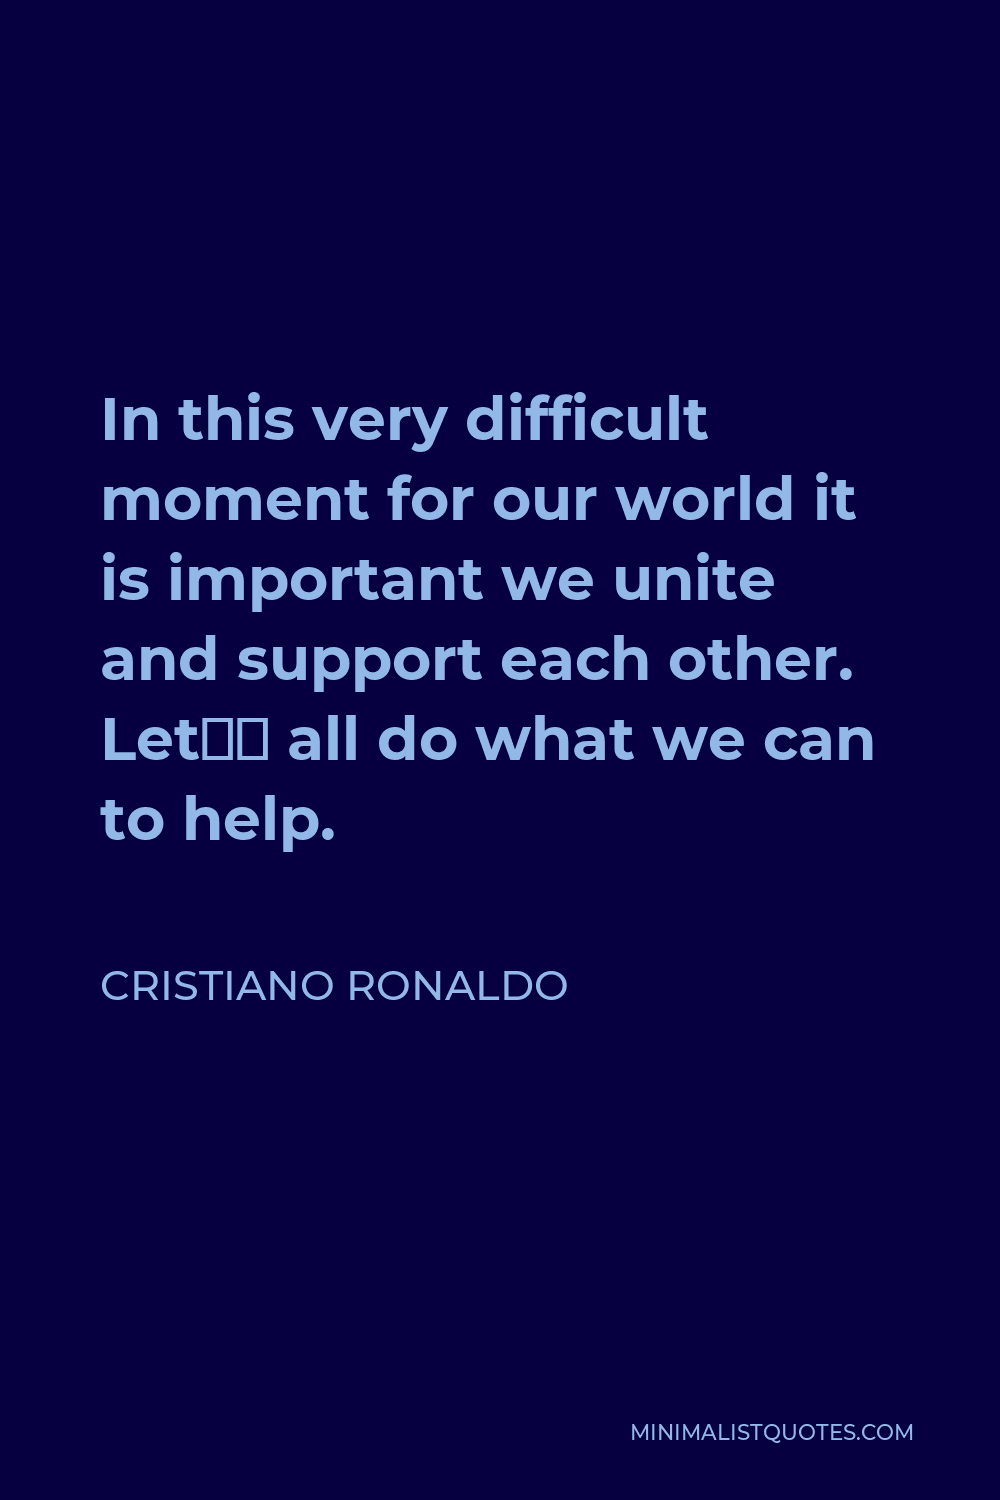 Cristiano Ronaldo Quote - In this very difficult moment for our world it is important we unite and support each other. Let’s all do what we can to help.